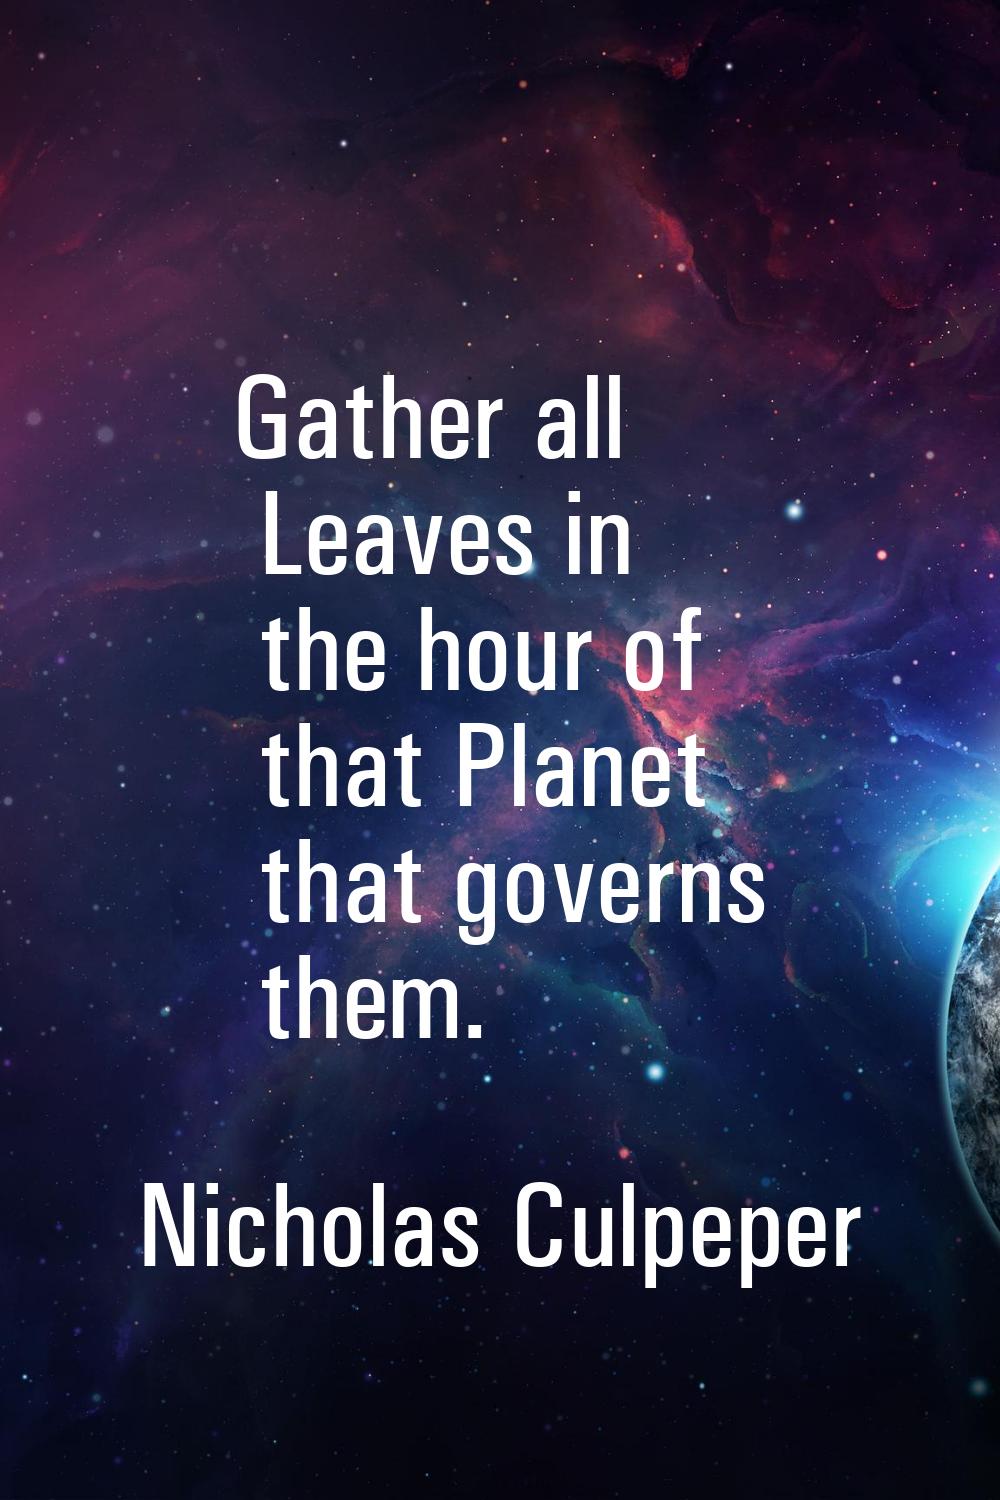 Gather all Leaves in the hour of that Planet that governs them.